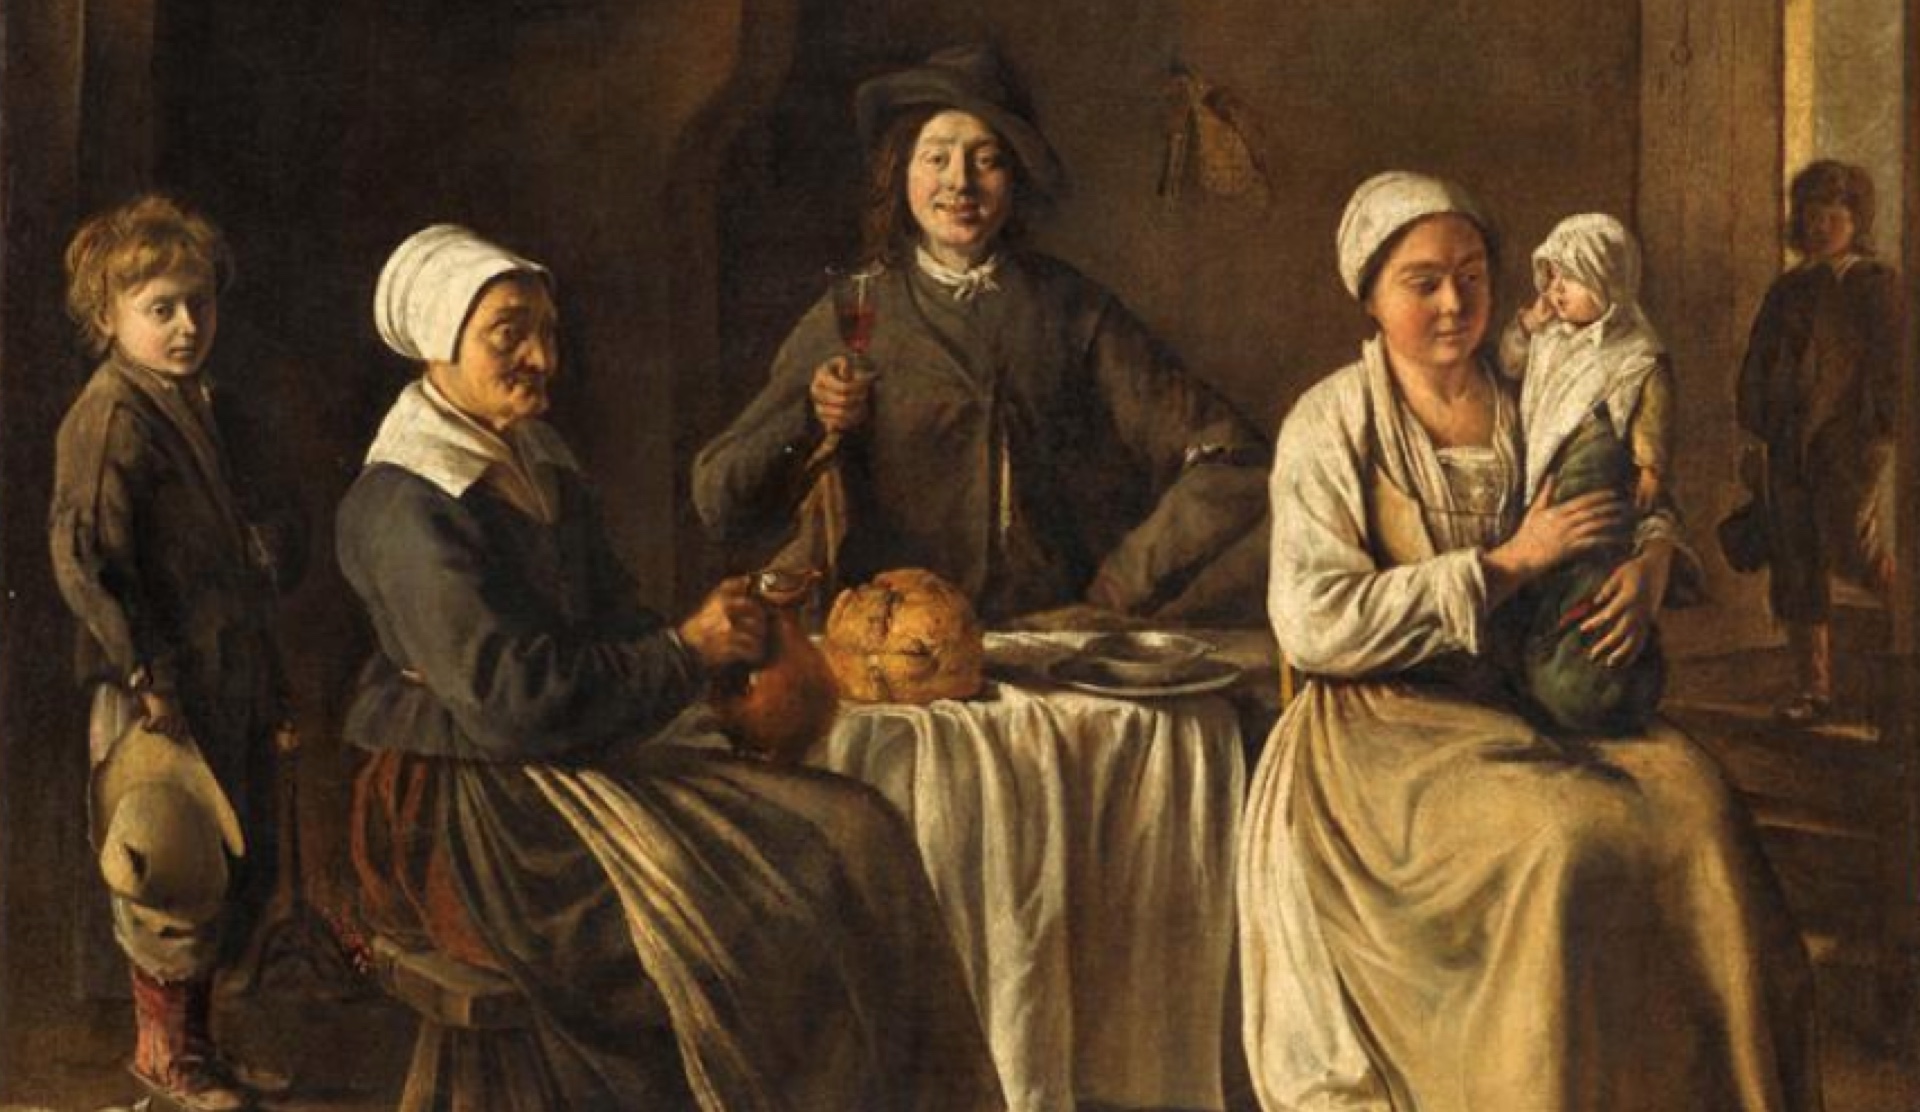 Painting of a family sitting around a table with bread and wine in the 18th century.